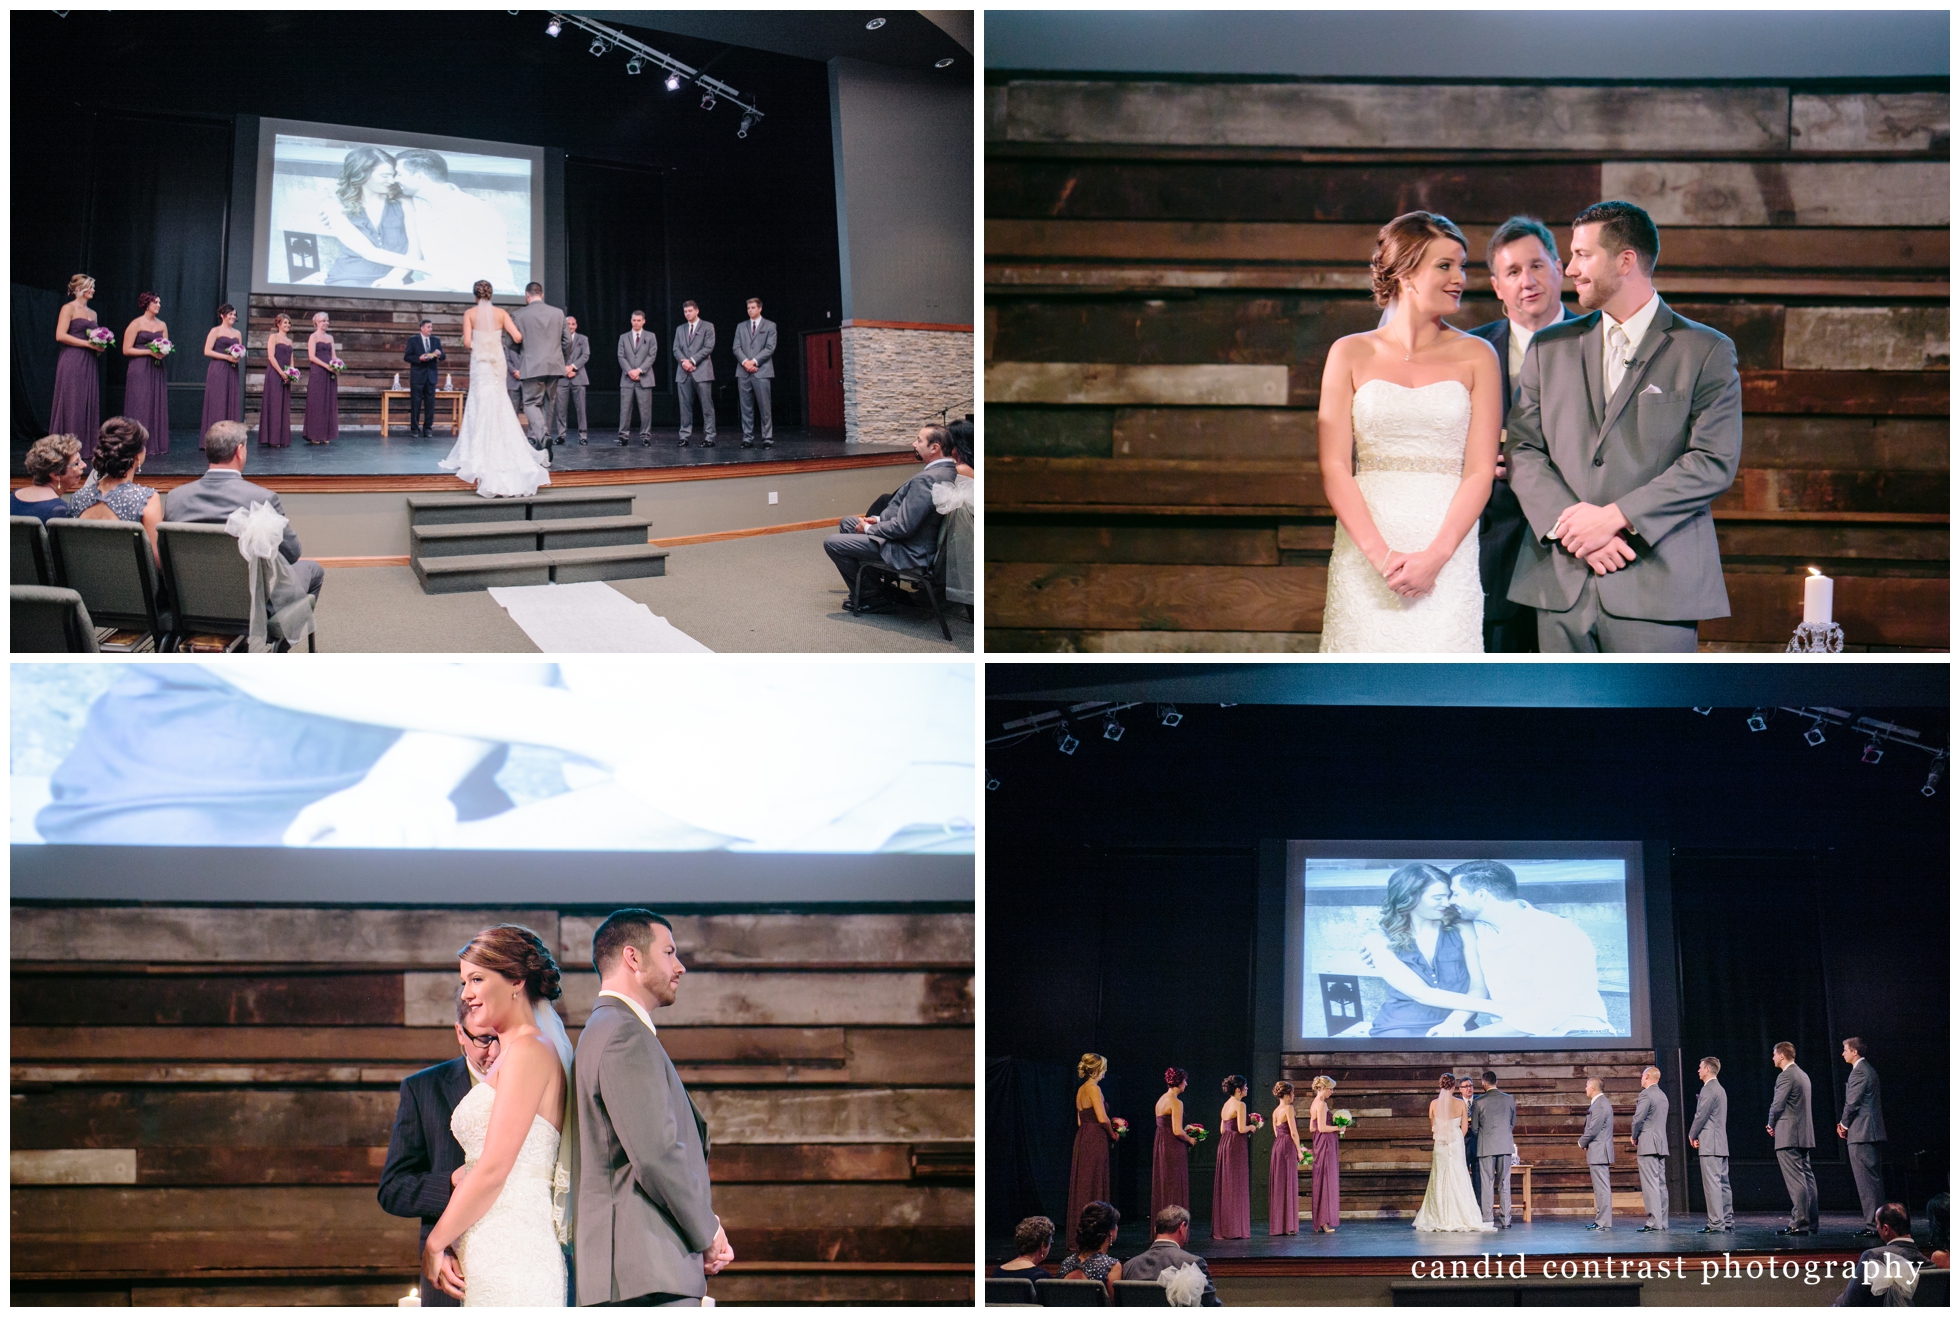 dubuque ia wedding ceremony at hope church , candid contrast photography 